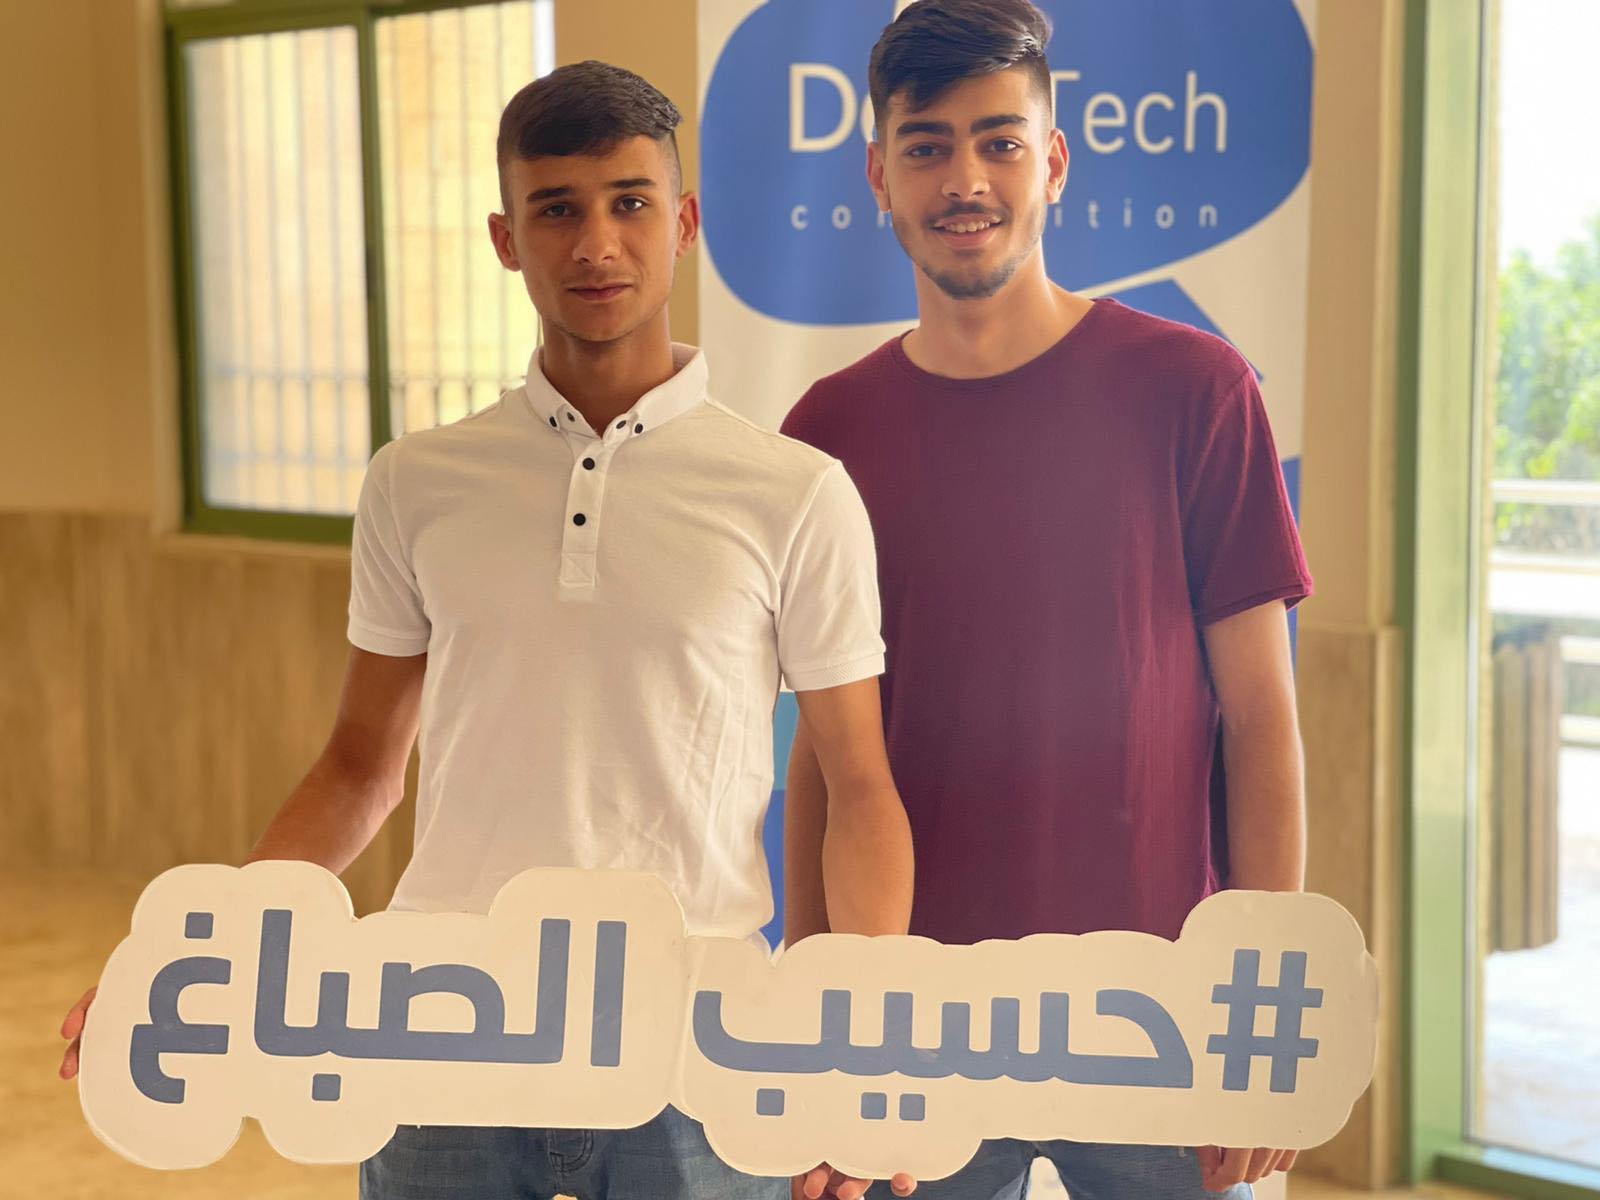 Part of the DocTech activities that were held at the Faculty of Engineering and Information Technology and the Faculty of Allied Medical Sciences.